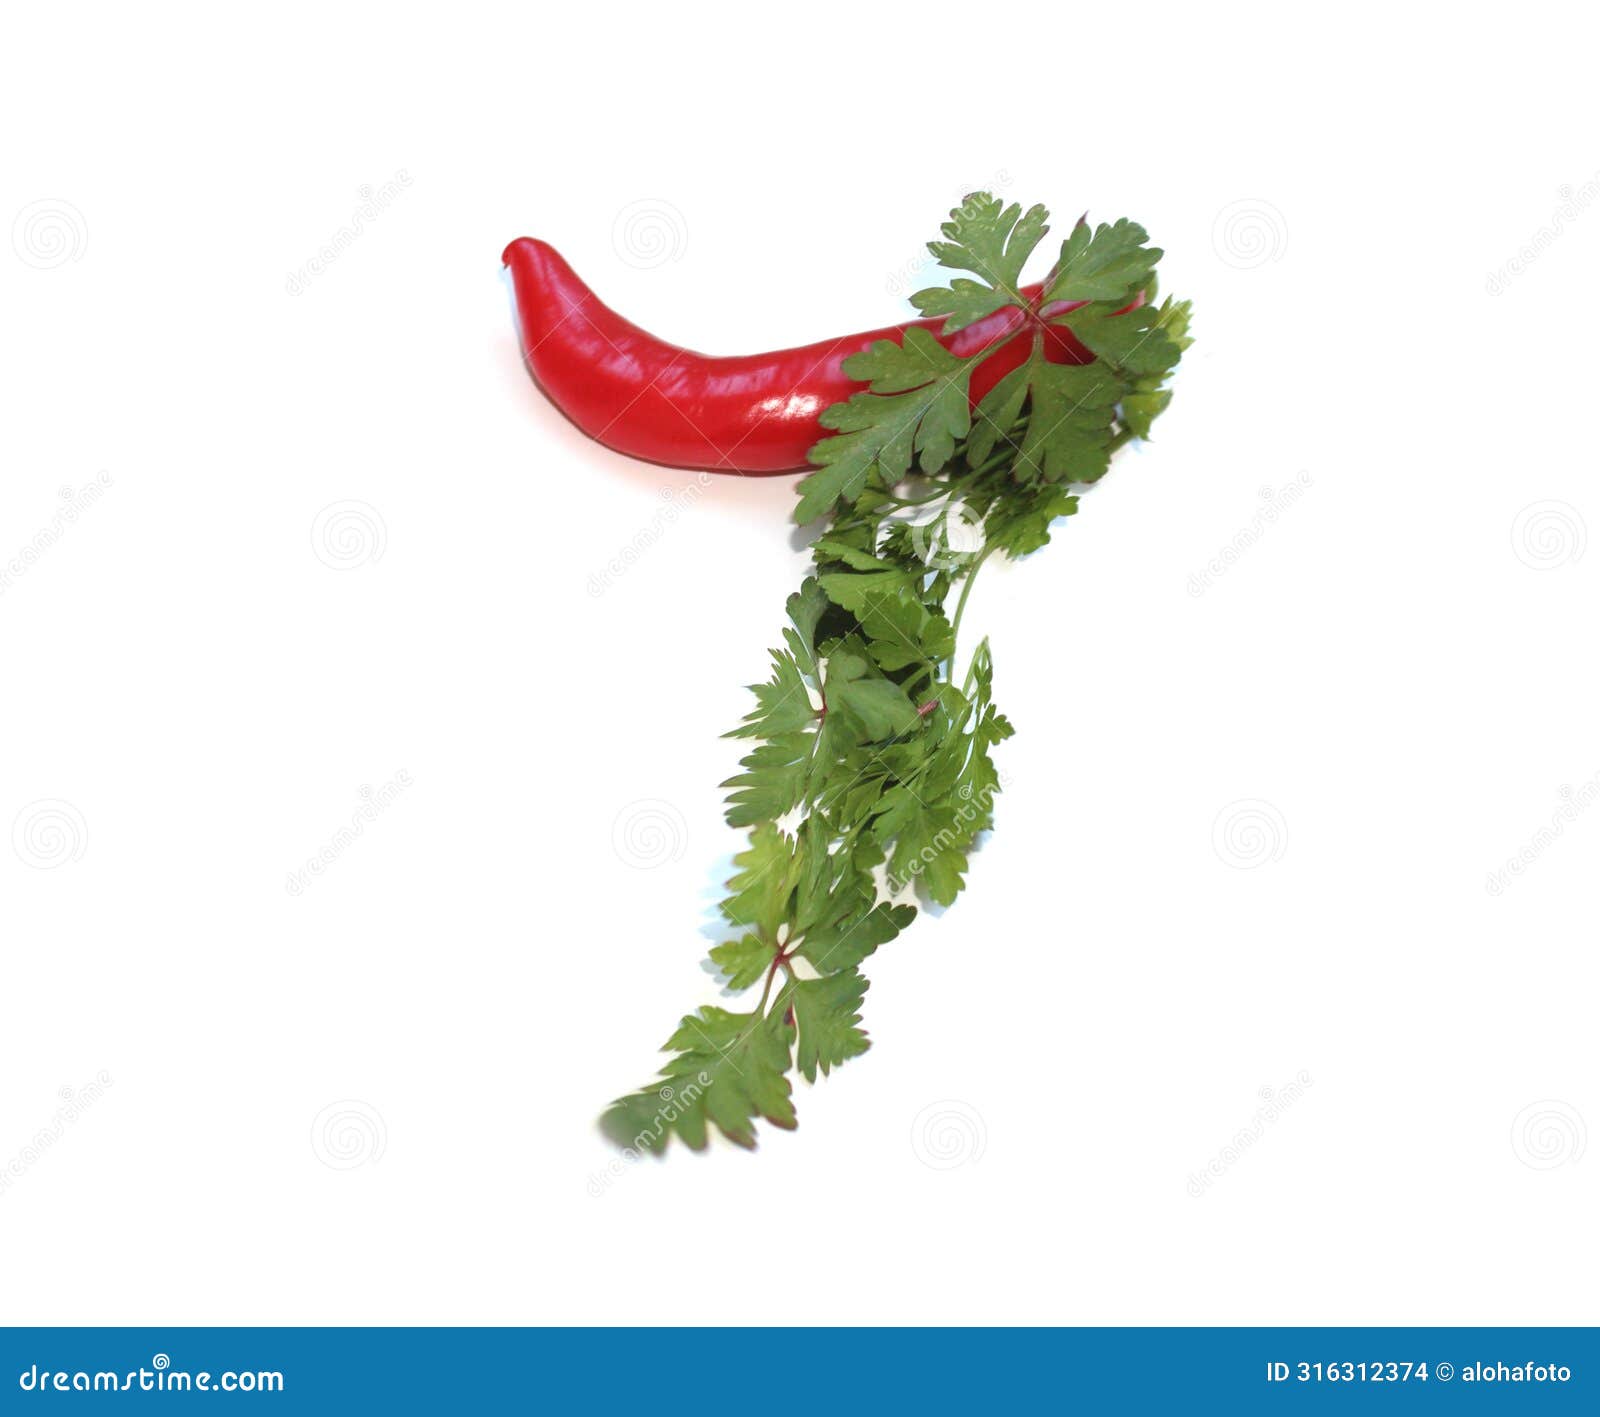 letter j from red chili pepper and green herbs, parsley letter for recipe